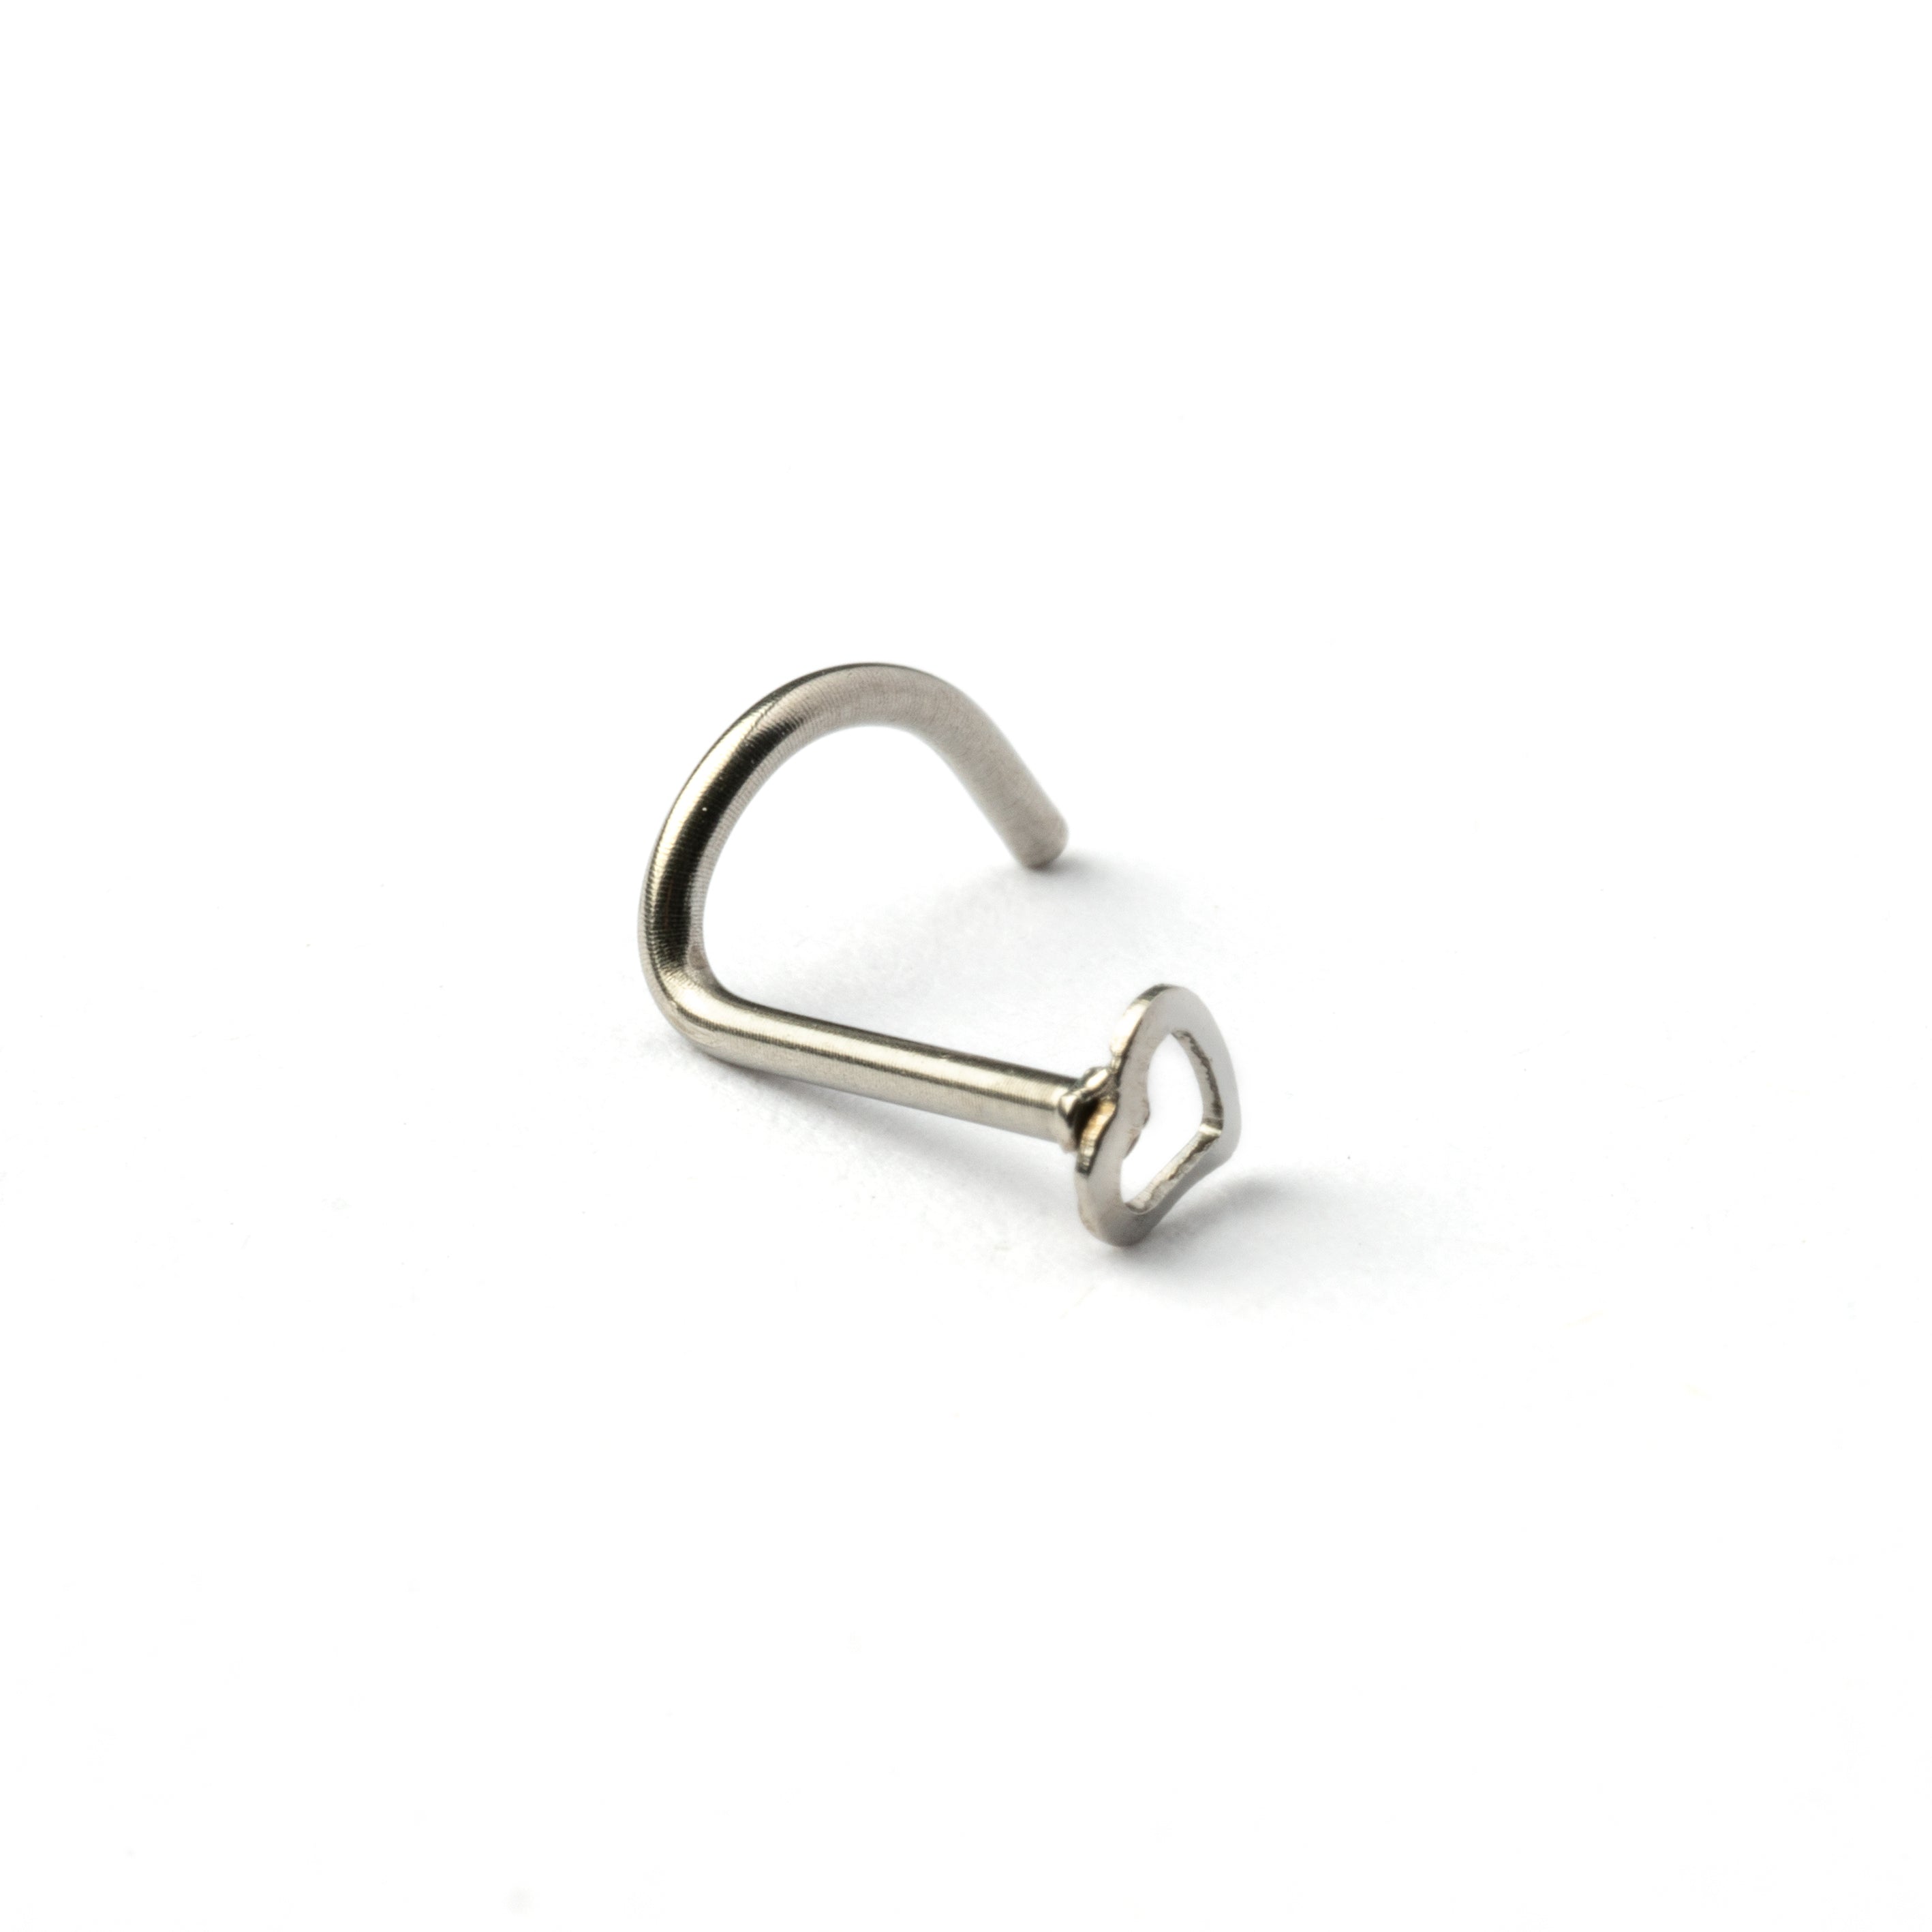 Silver heart wire nose stud left side view